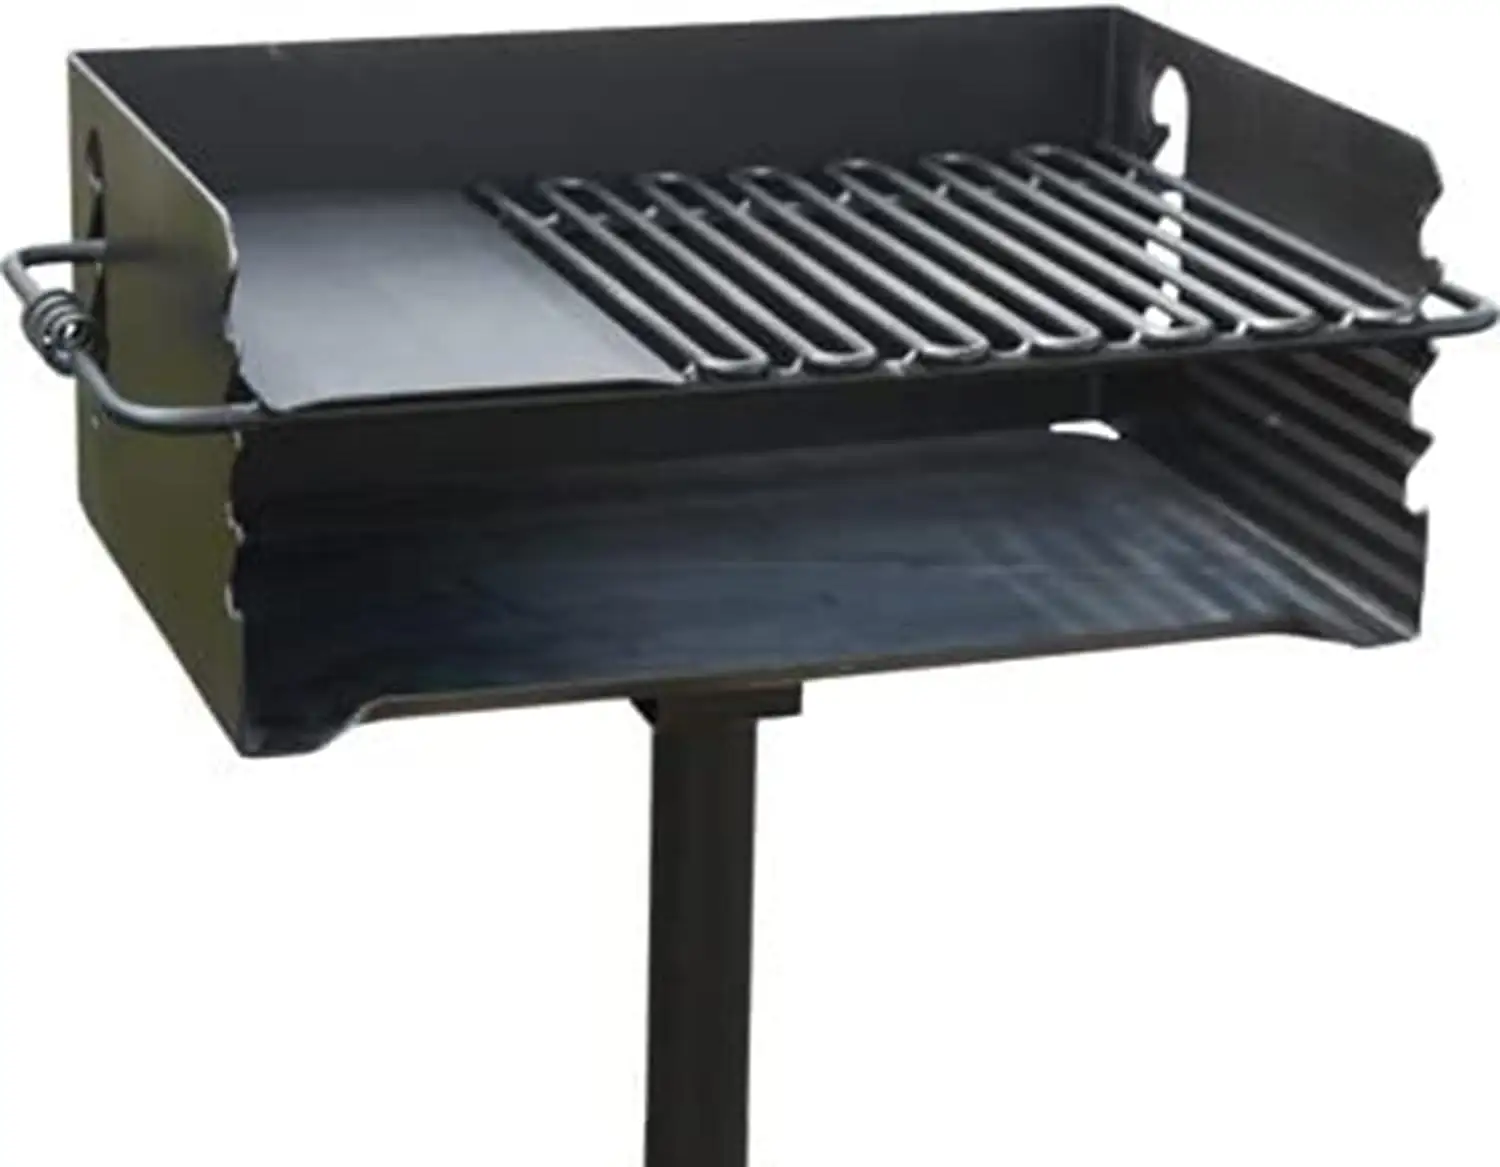 Grill Holzkohle tragbar Barbecue Hochleistungsstahl Outdoor-Grill Holzkohle Grill Barbecue Grill Outdoor-Holzkohle